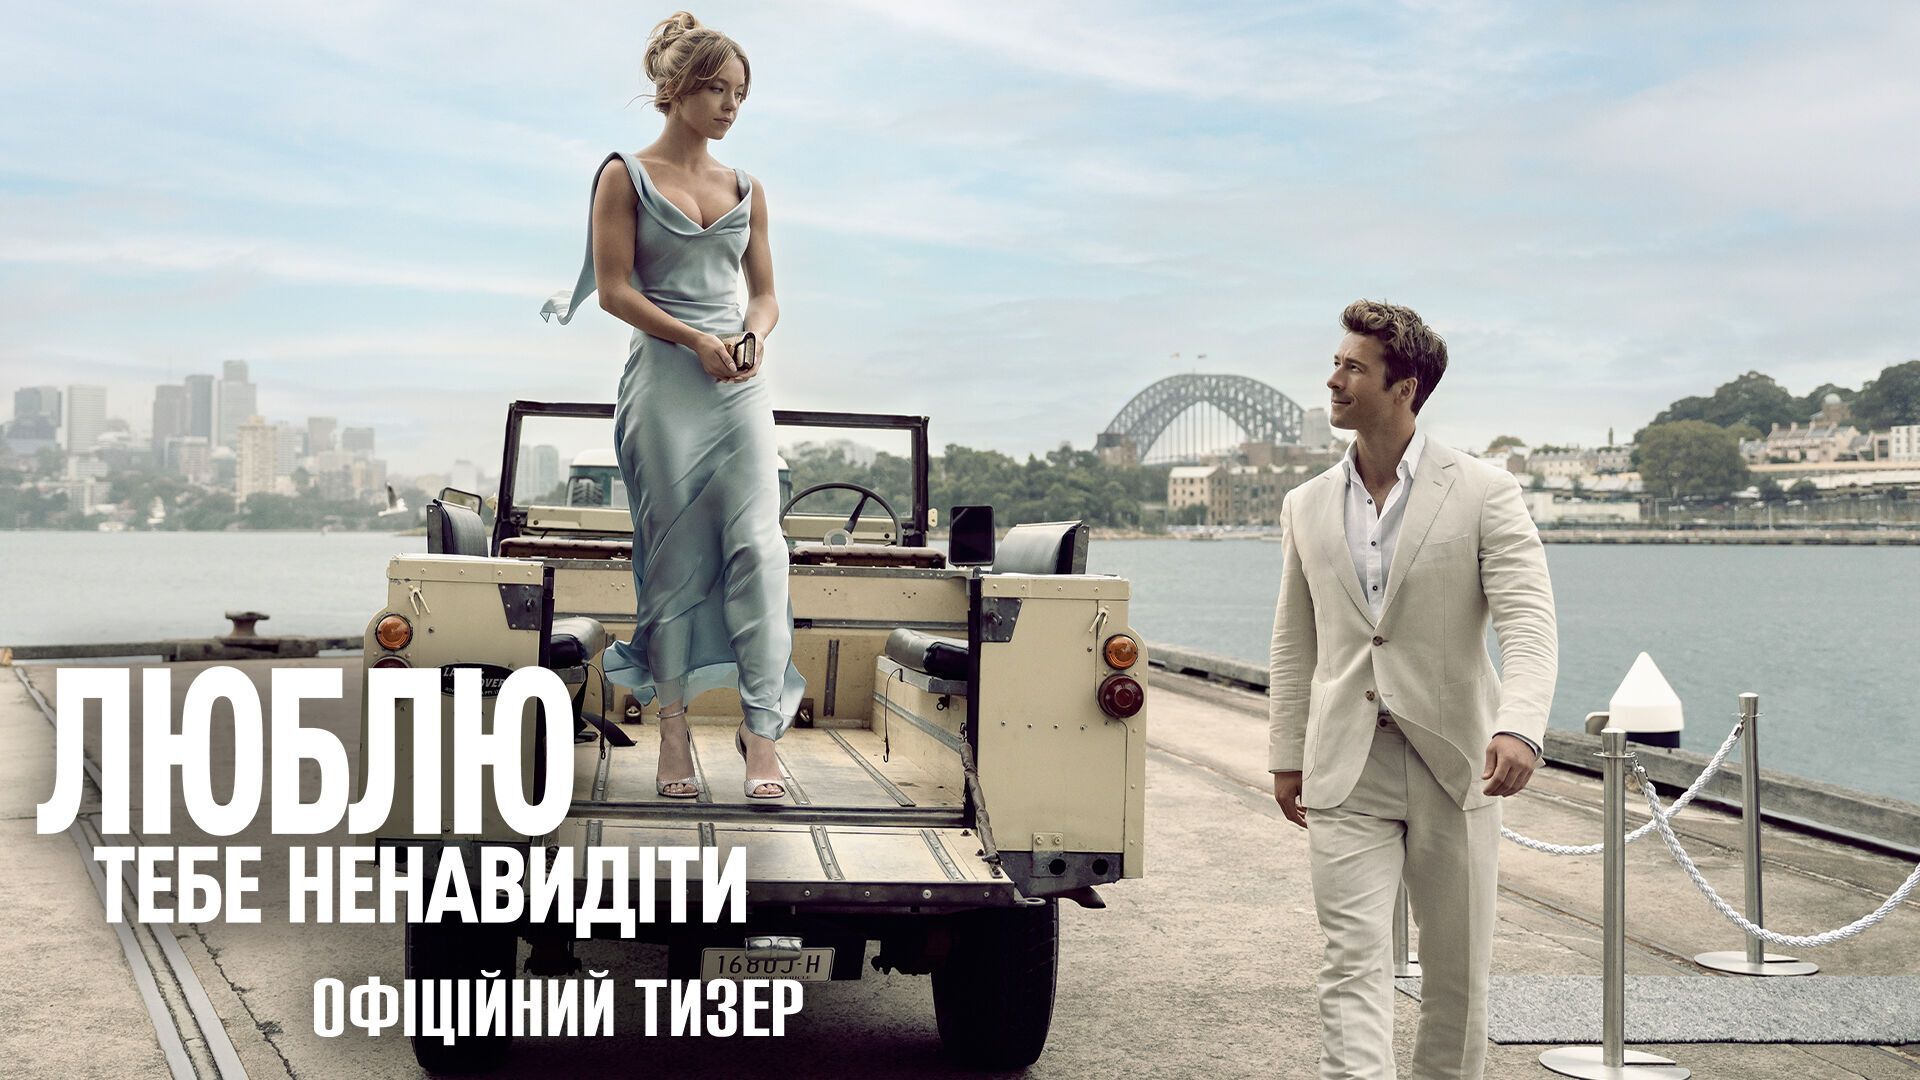 Anyone But You: official Ukrainian trailer for the romantic comedy is finally here